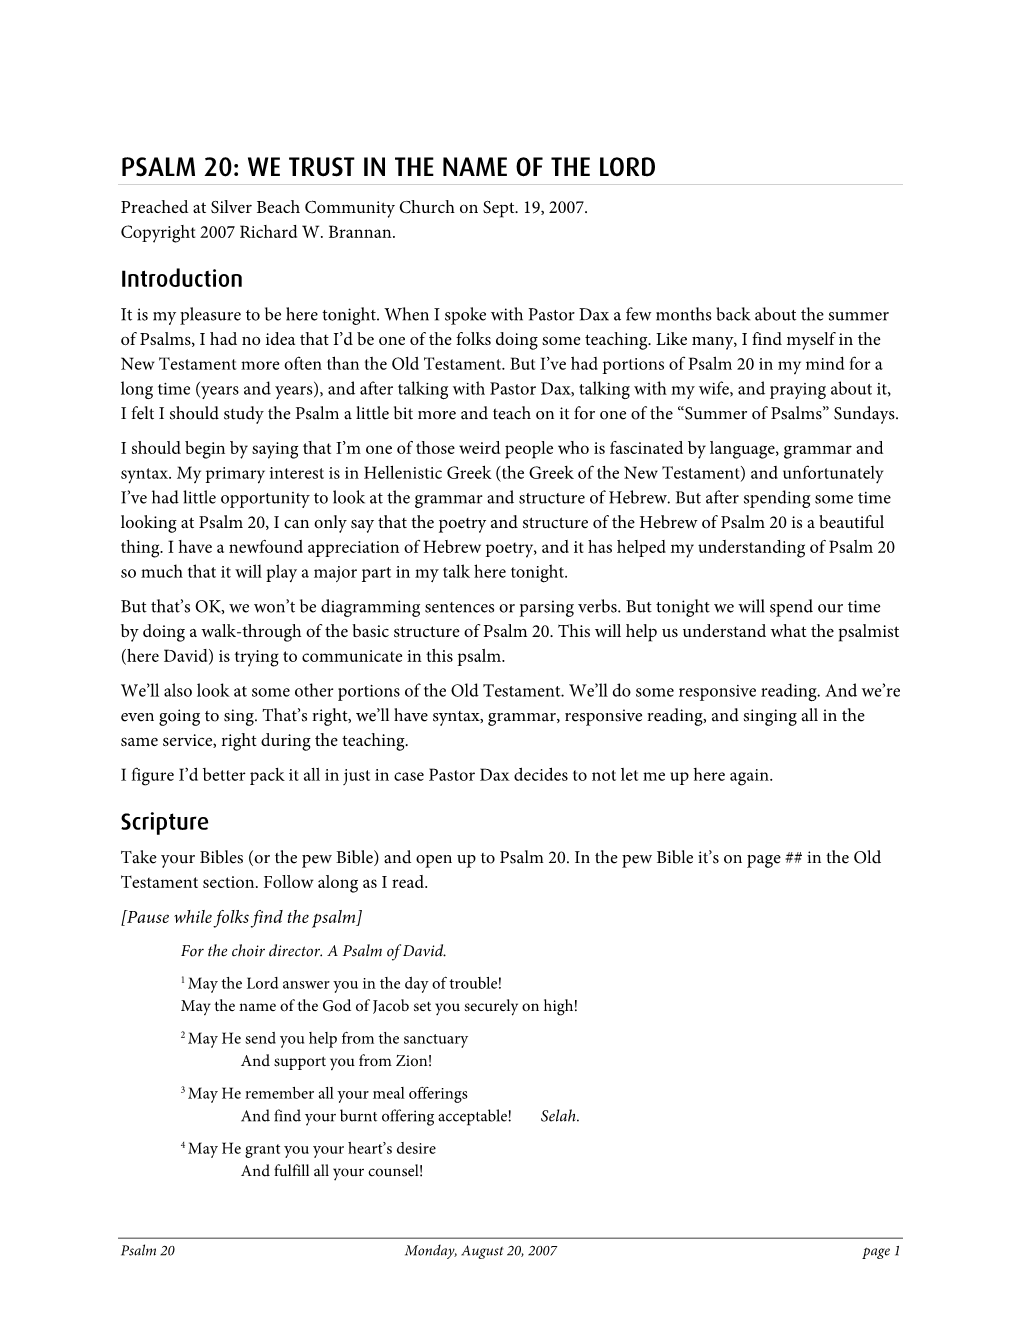 PSALM 20: WE TRUST in the NAME of the LORD Preached at Silver Beach Community Church on Sept